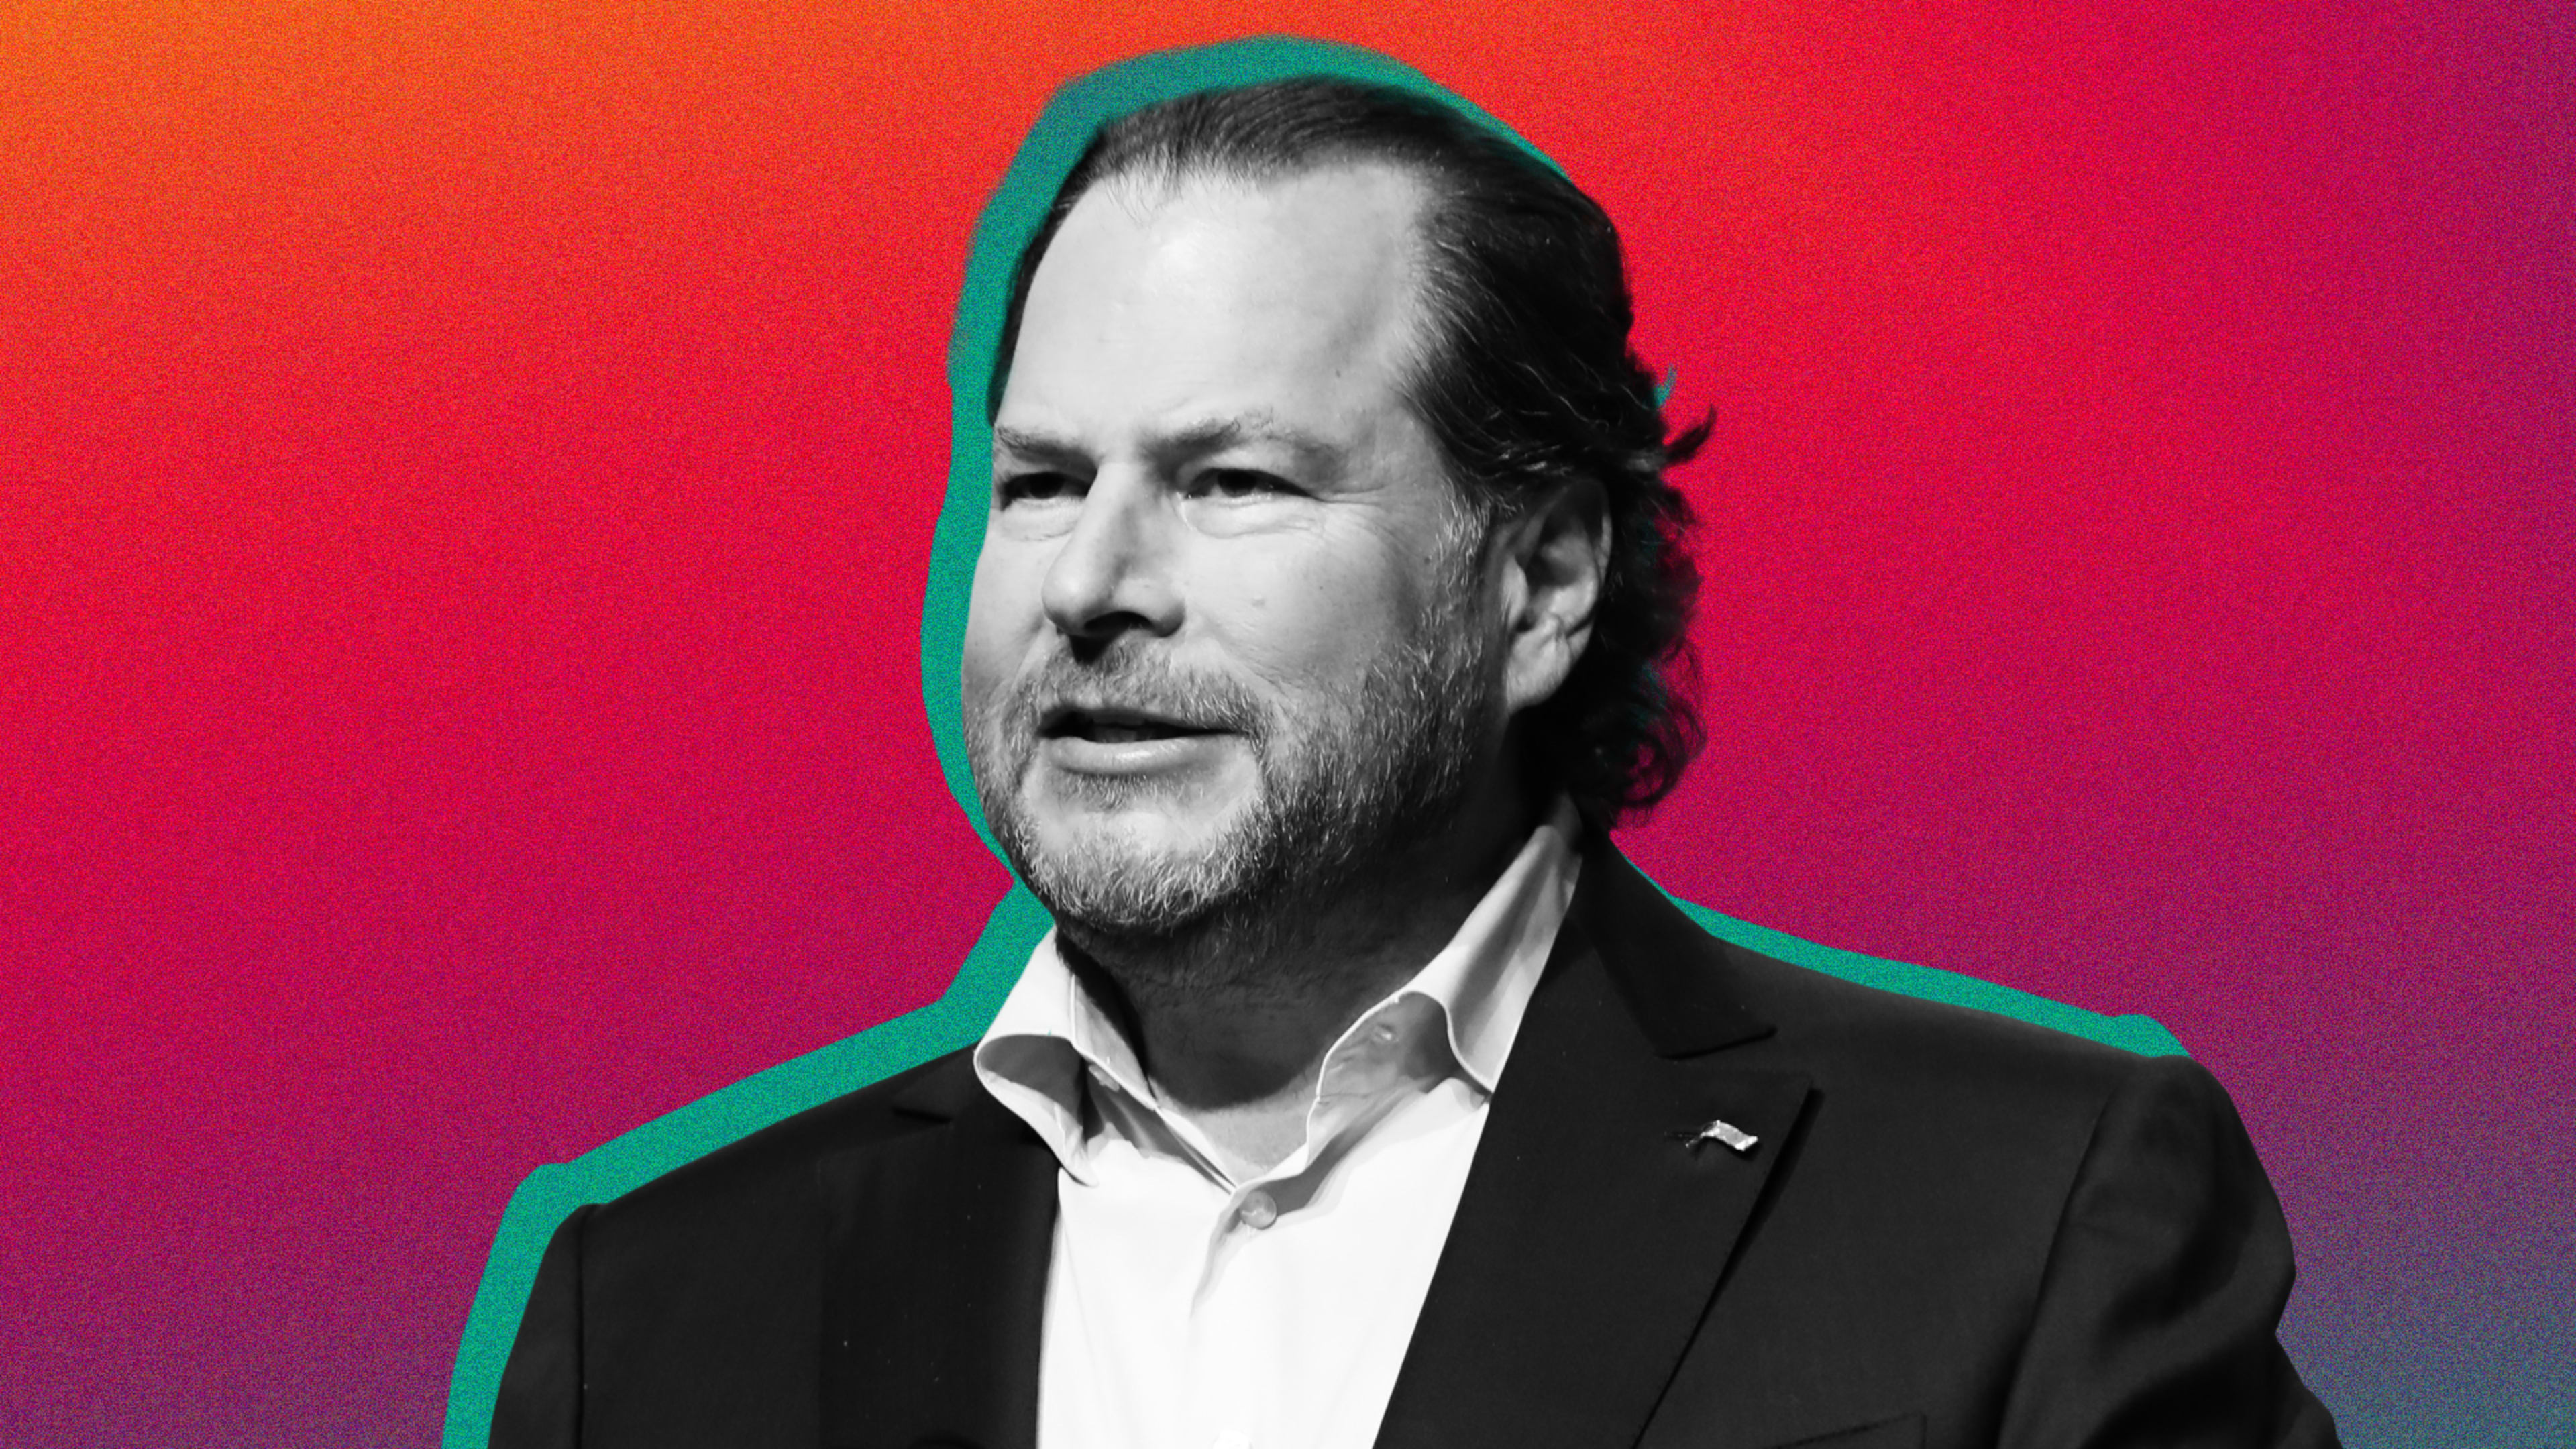 Salesforce’s Marc Benioff: ‘I was in unexplored territory for a CEO’